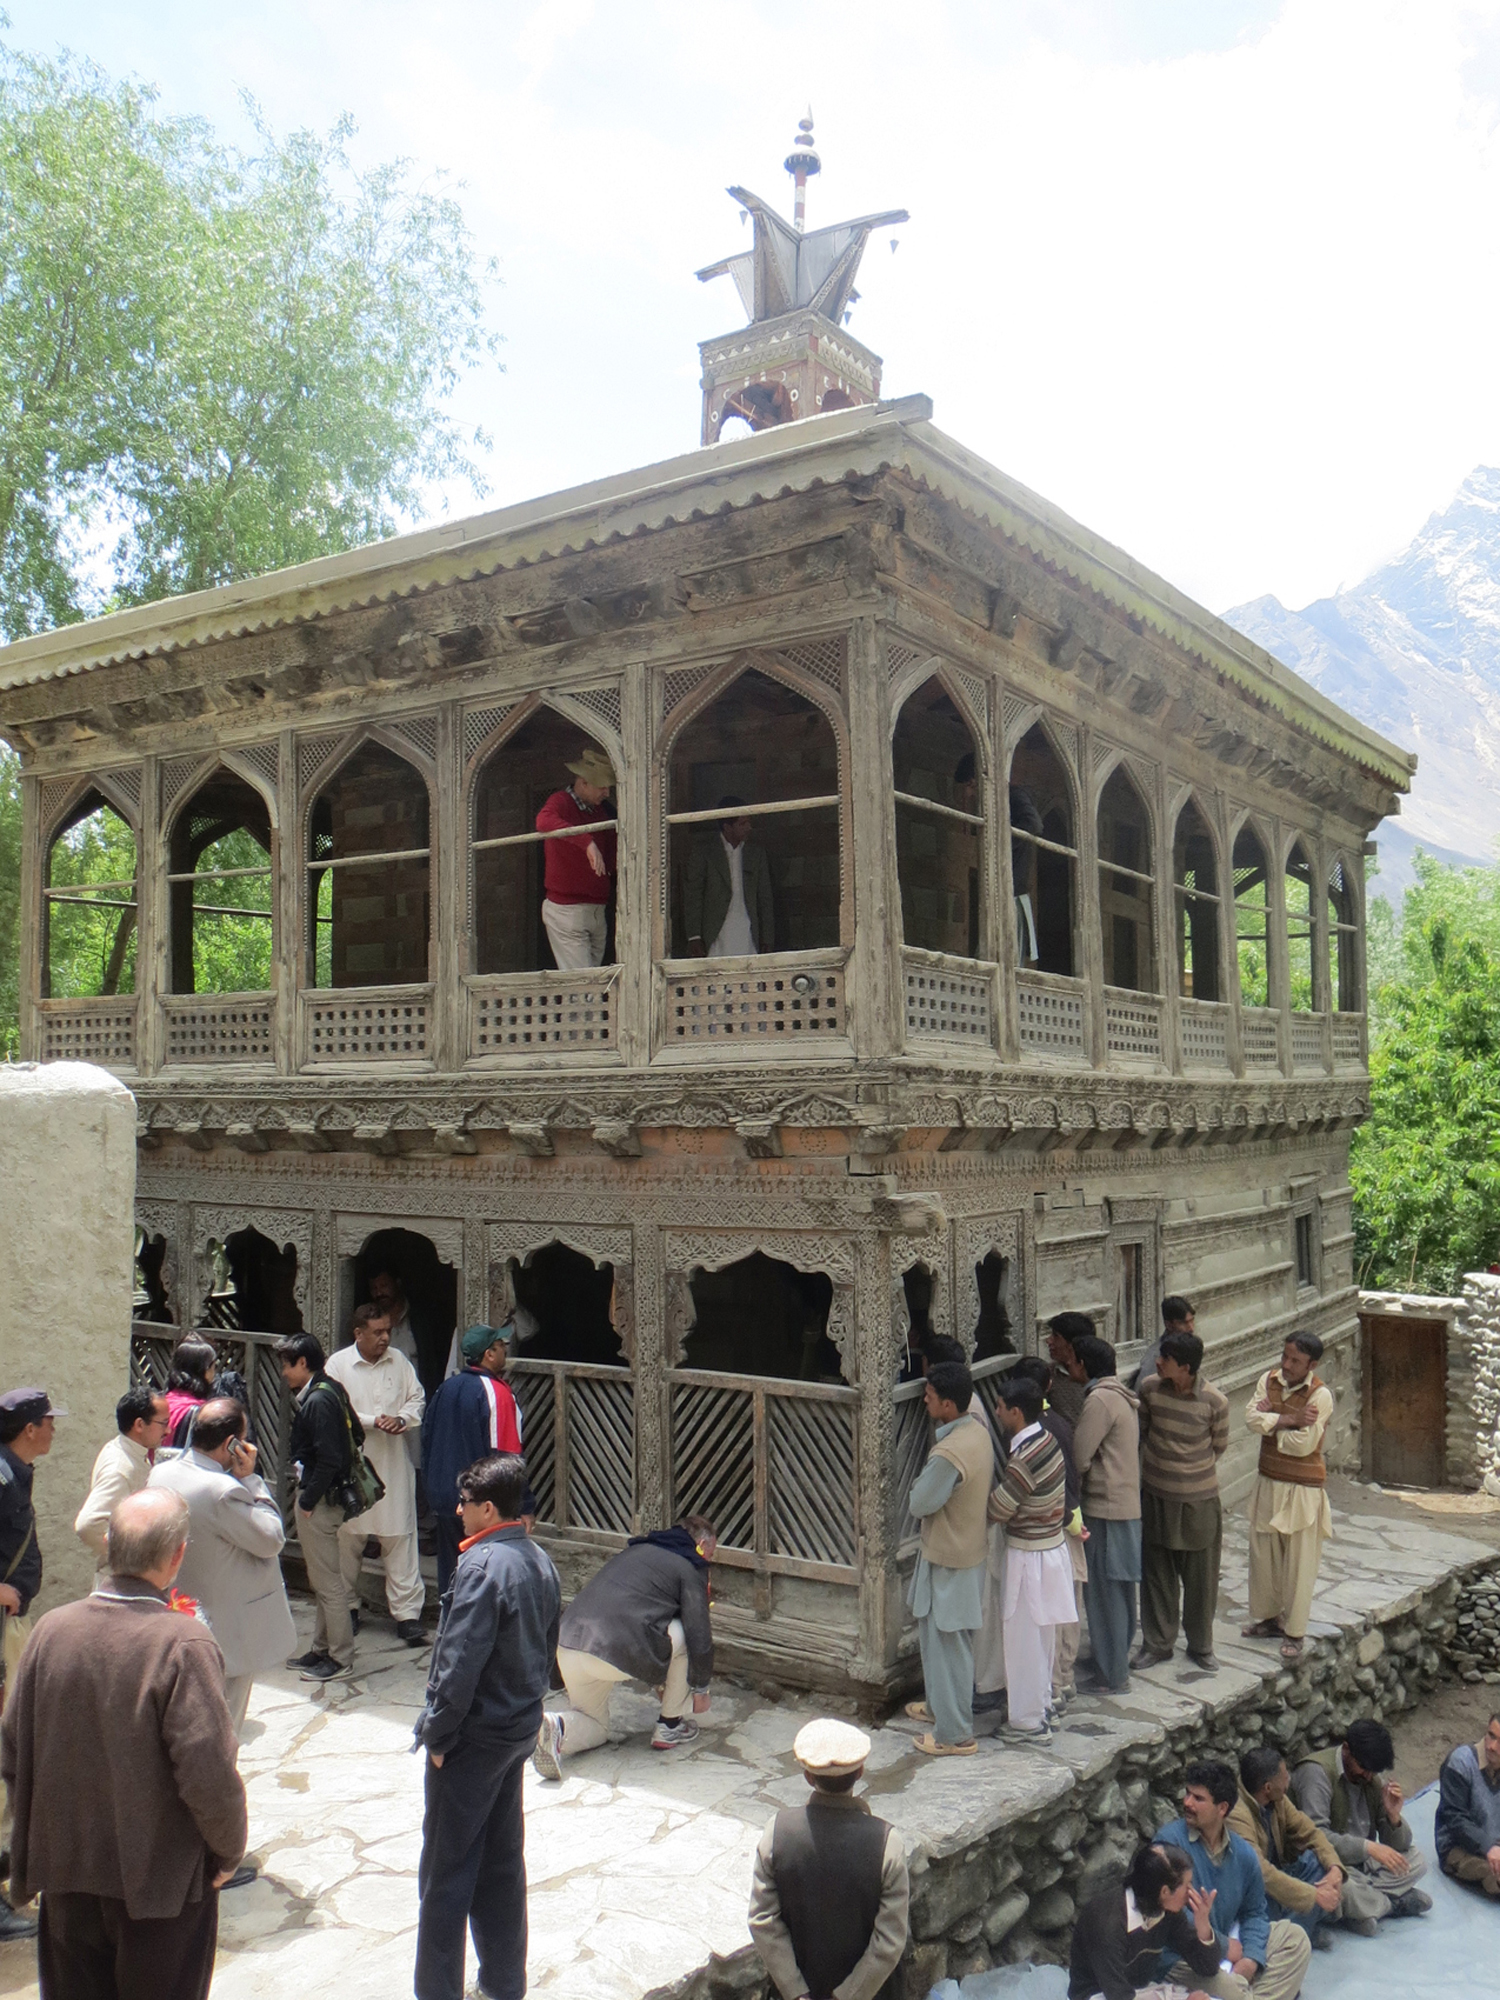 Community and guests are interacting with the historic structure